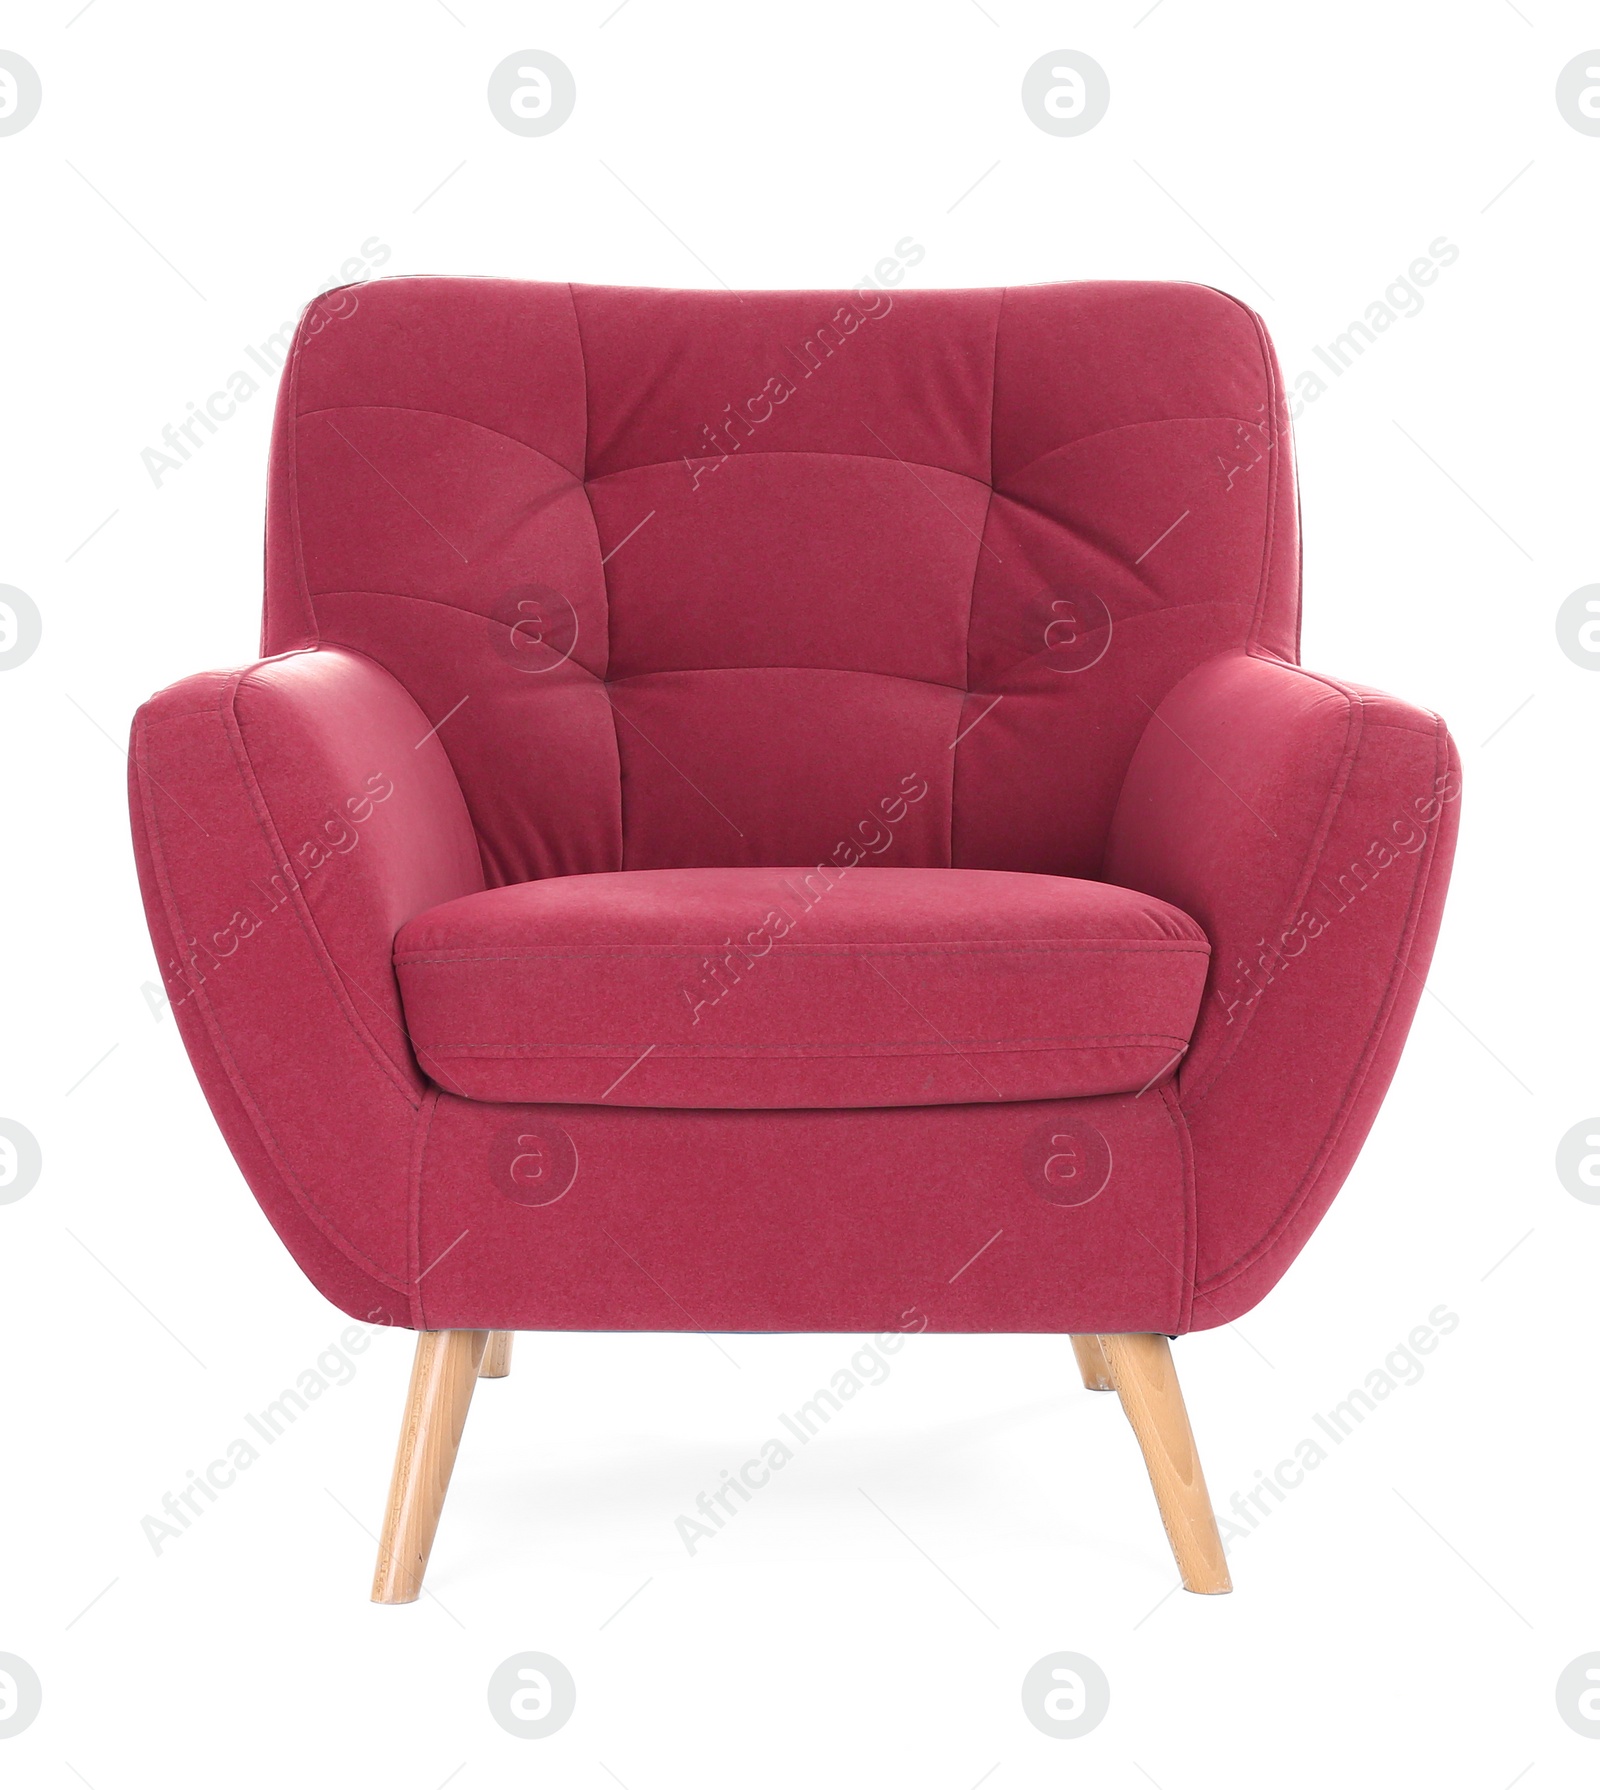 Image of One comfortable hibiscus color armchair isolated on white